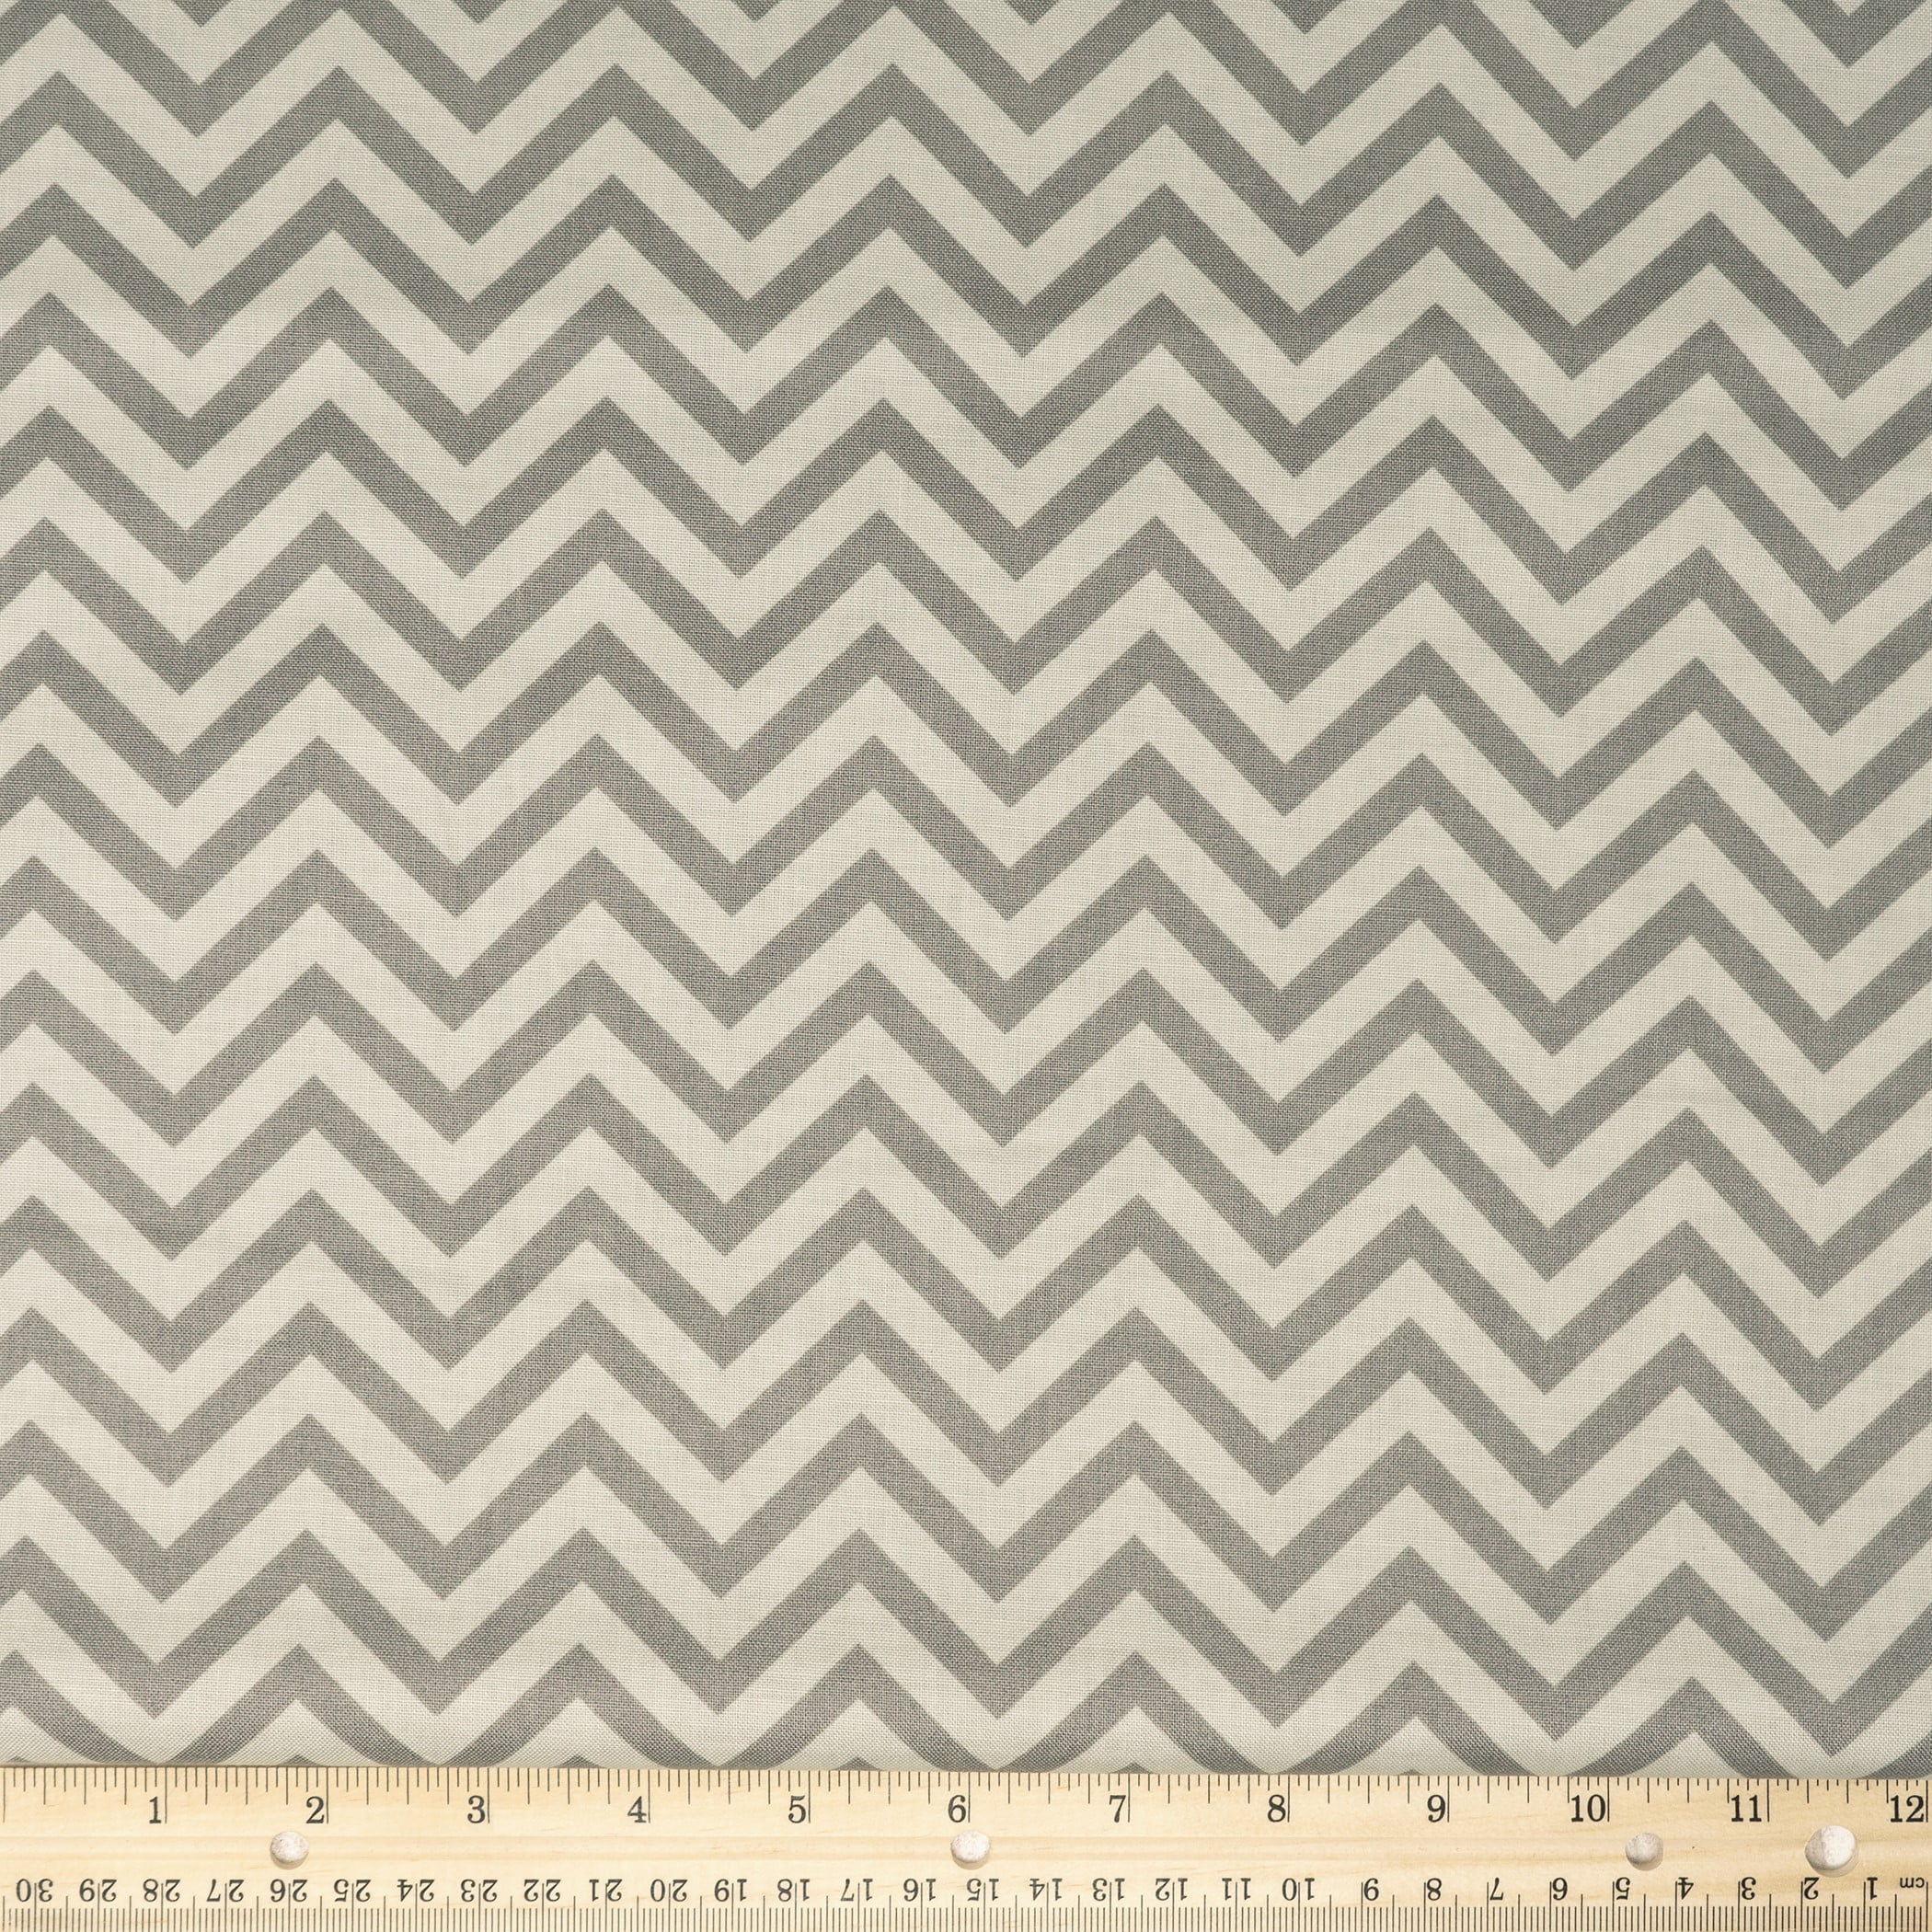  RTC Fabric, Cotton 44 Stripe Grass Color Sewing Fabric by The  Yard : Arts, Crafts & Sewing